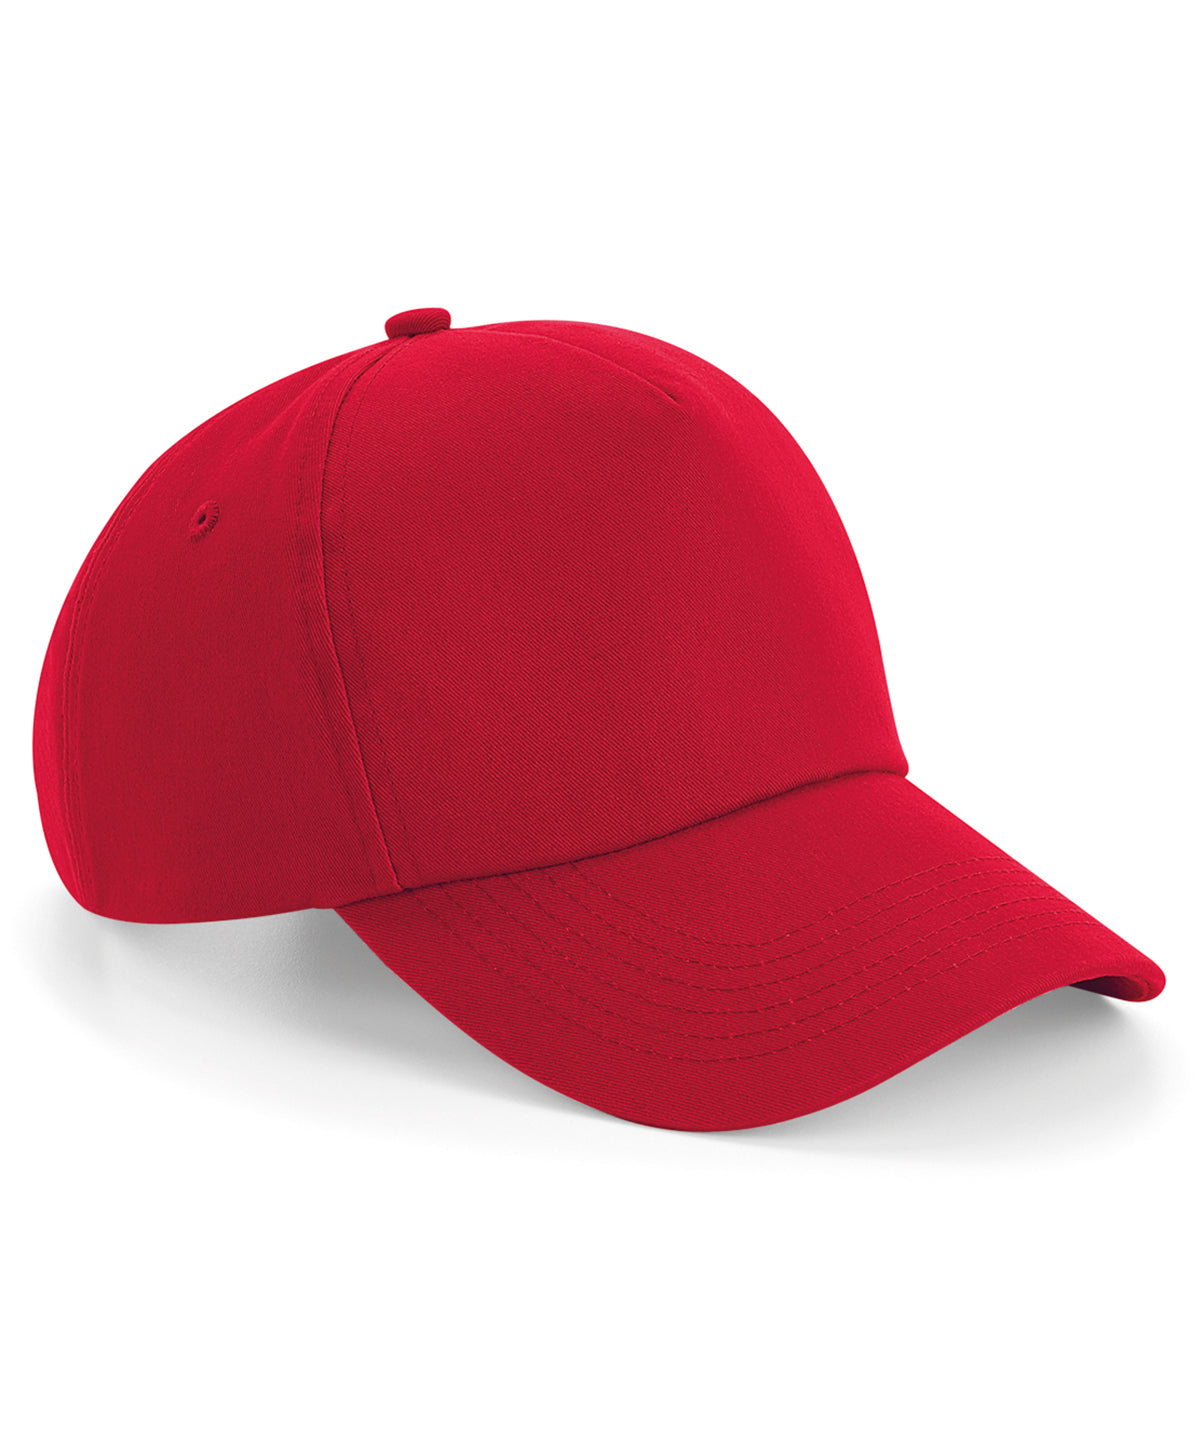 Personalised Caps - Mid Red Beechfield Authentic 5-panel cap